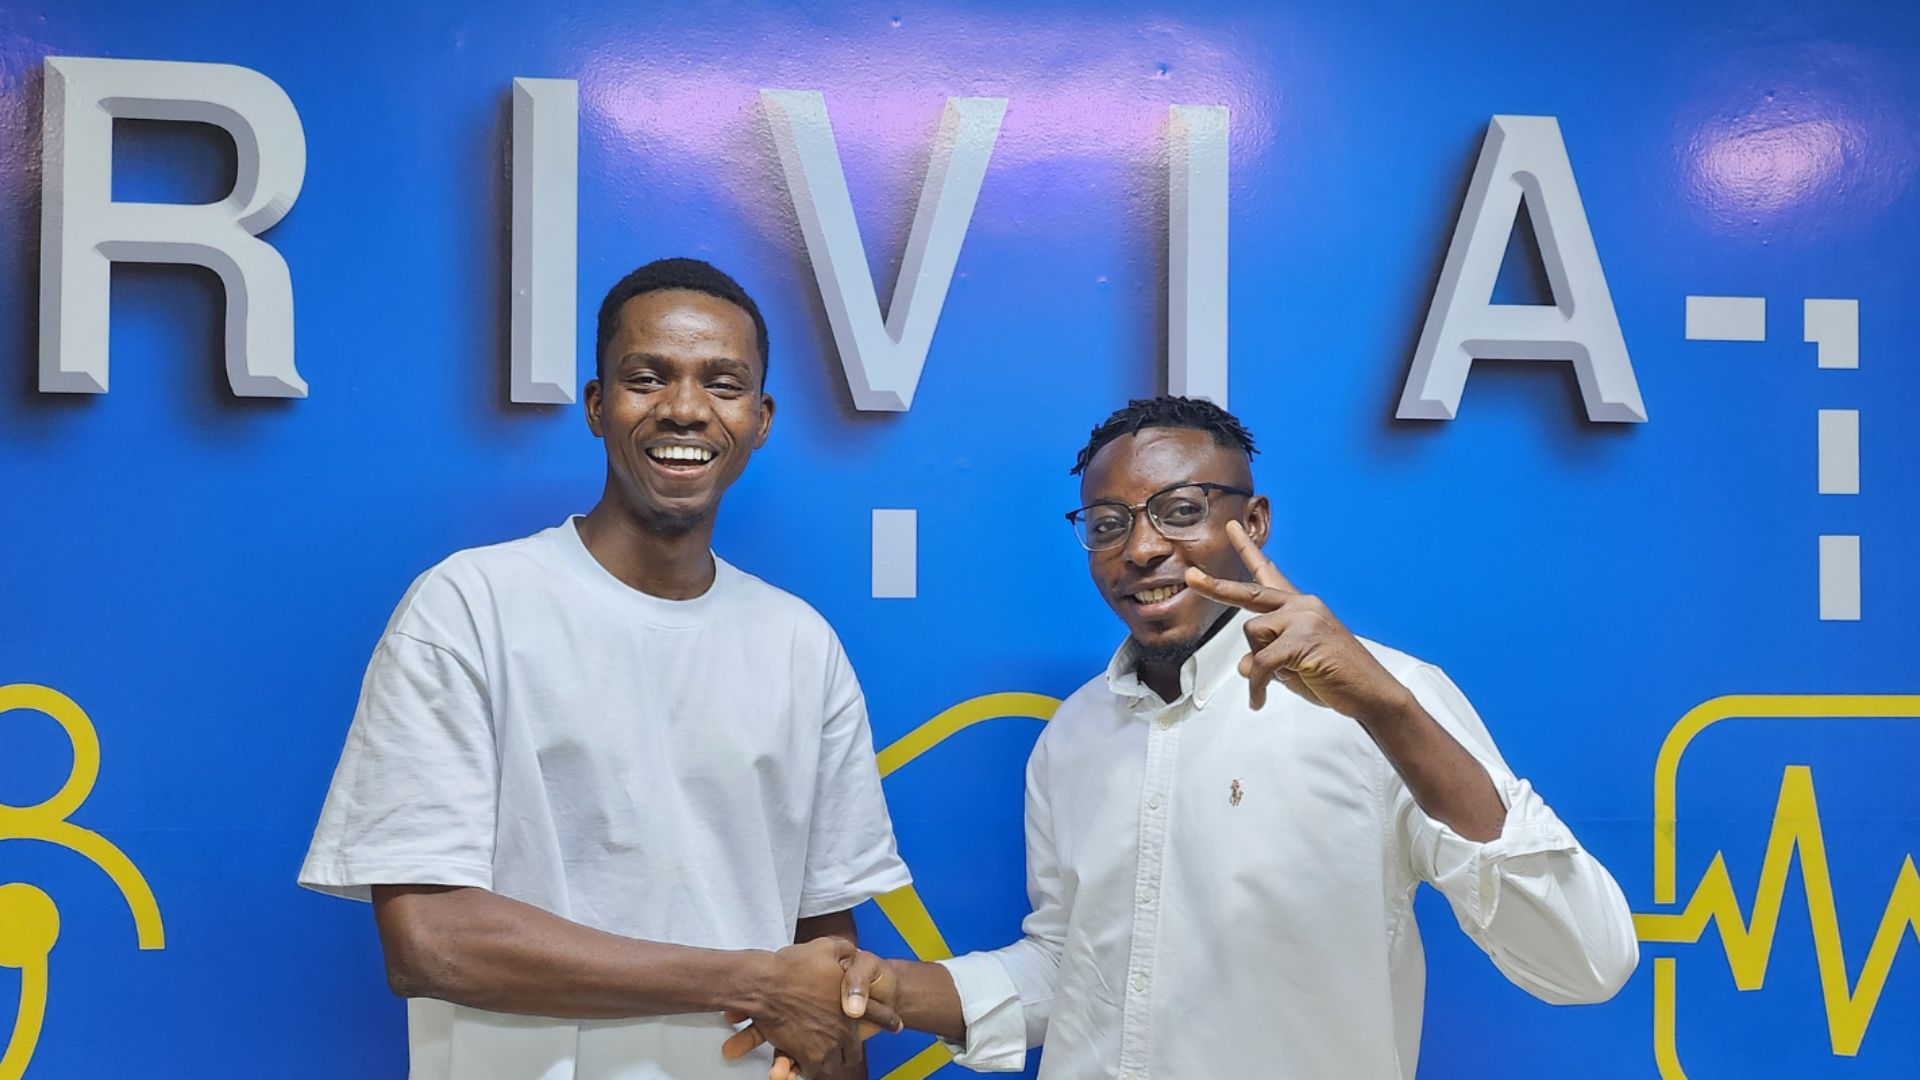 Rivia Accelerates Healthcare Digitization with Waffle Acquisition: Transforming Primary Care in Ghana